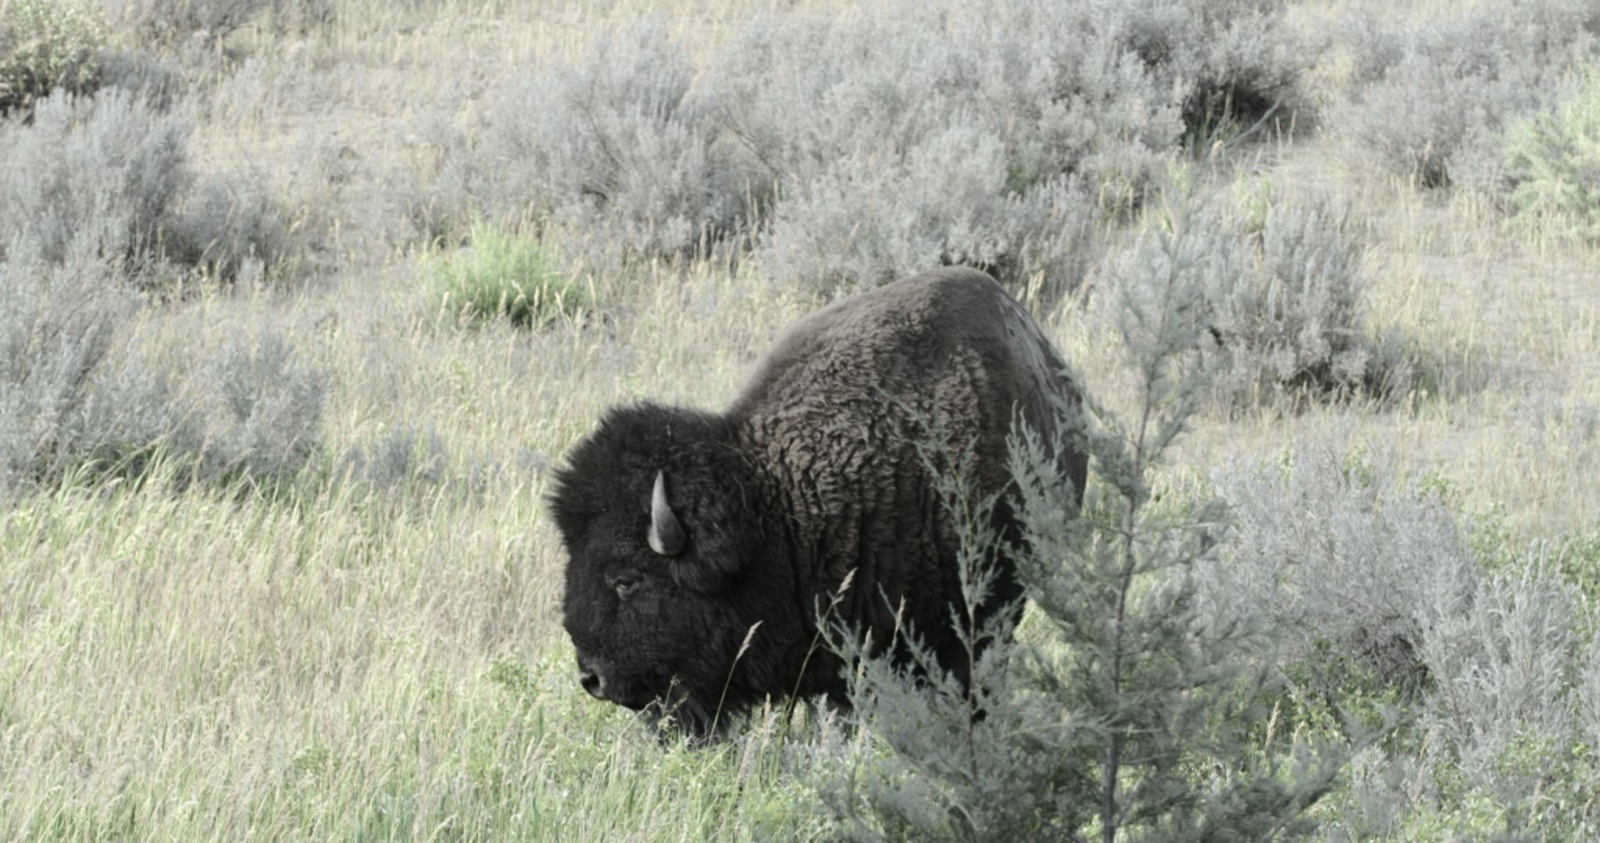 The Changing Climate - Bison  A bison in Teddy Roosevelt National Park, the last...